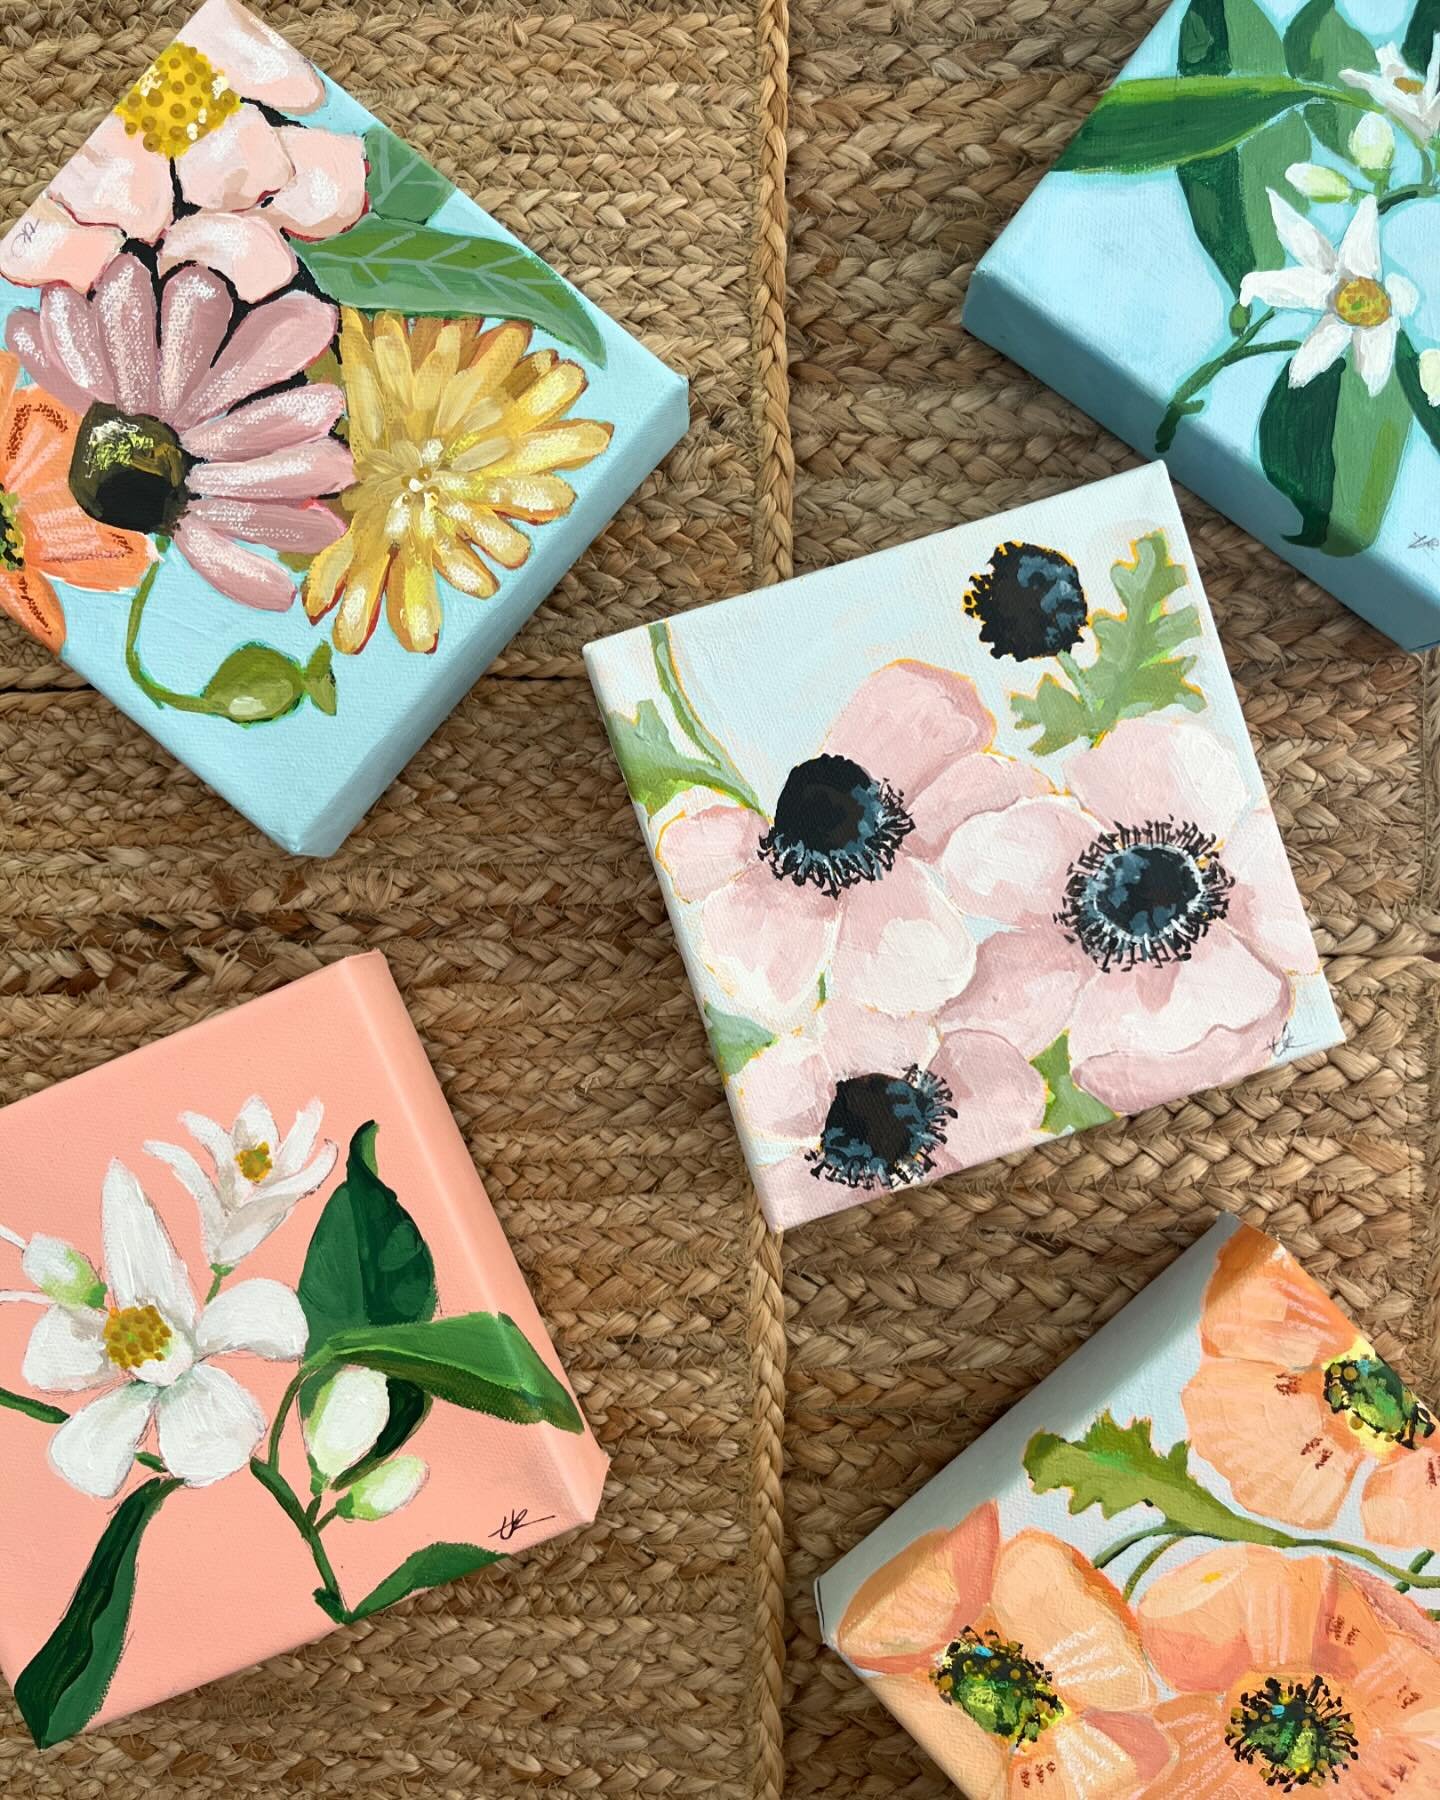 Sweet little florals are home from the gallery and awaiting their forever home. 

Shop link in bio
6x6 acrylic on canvas
$70

#floralart #miniart #florallove #foreverflowers #artforyourhome #shopsmall #makeyourhomebeautiful #createjoy #sharejoy #gath